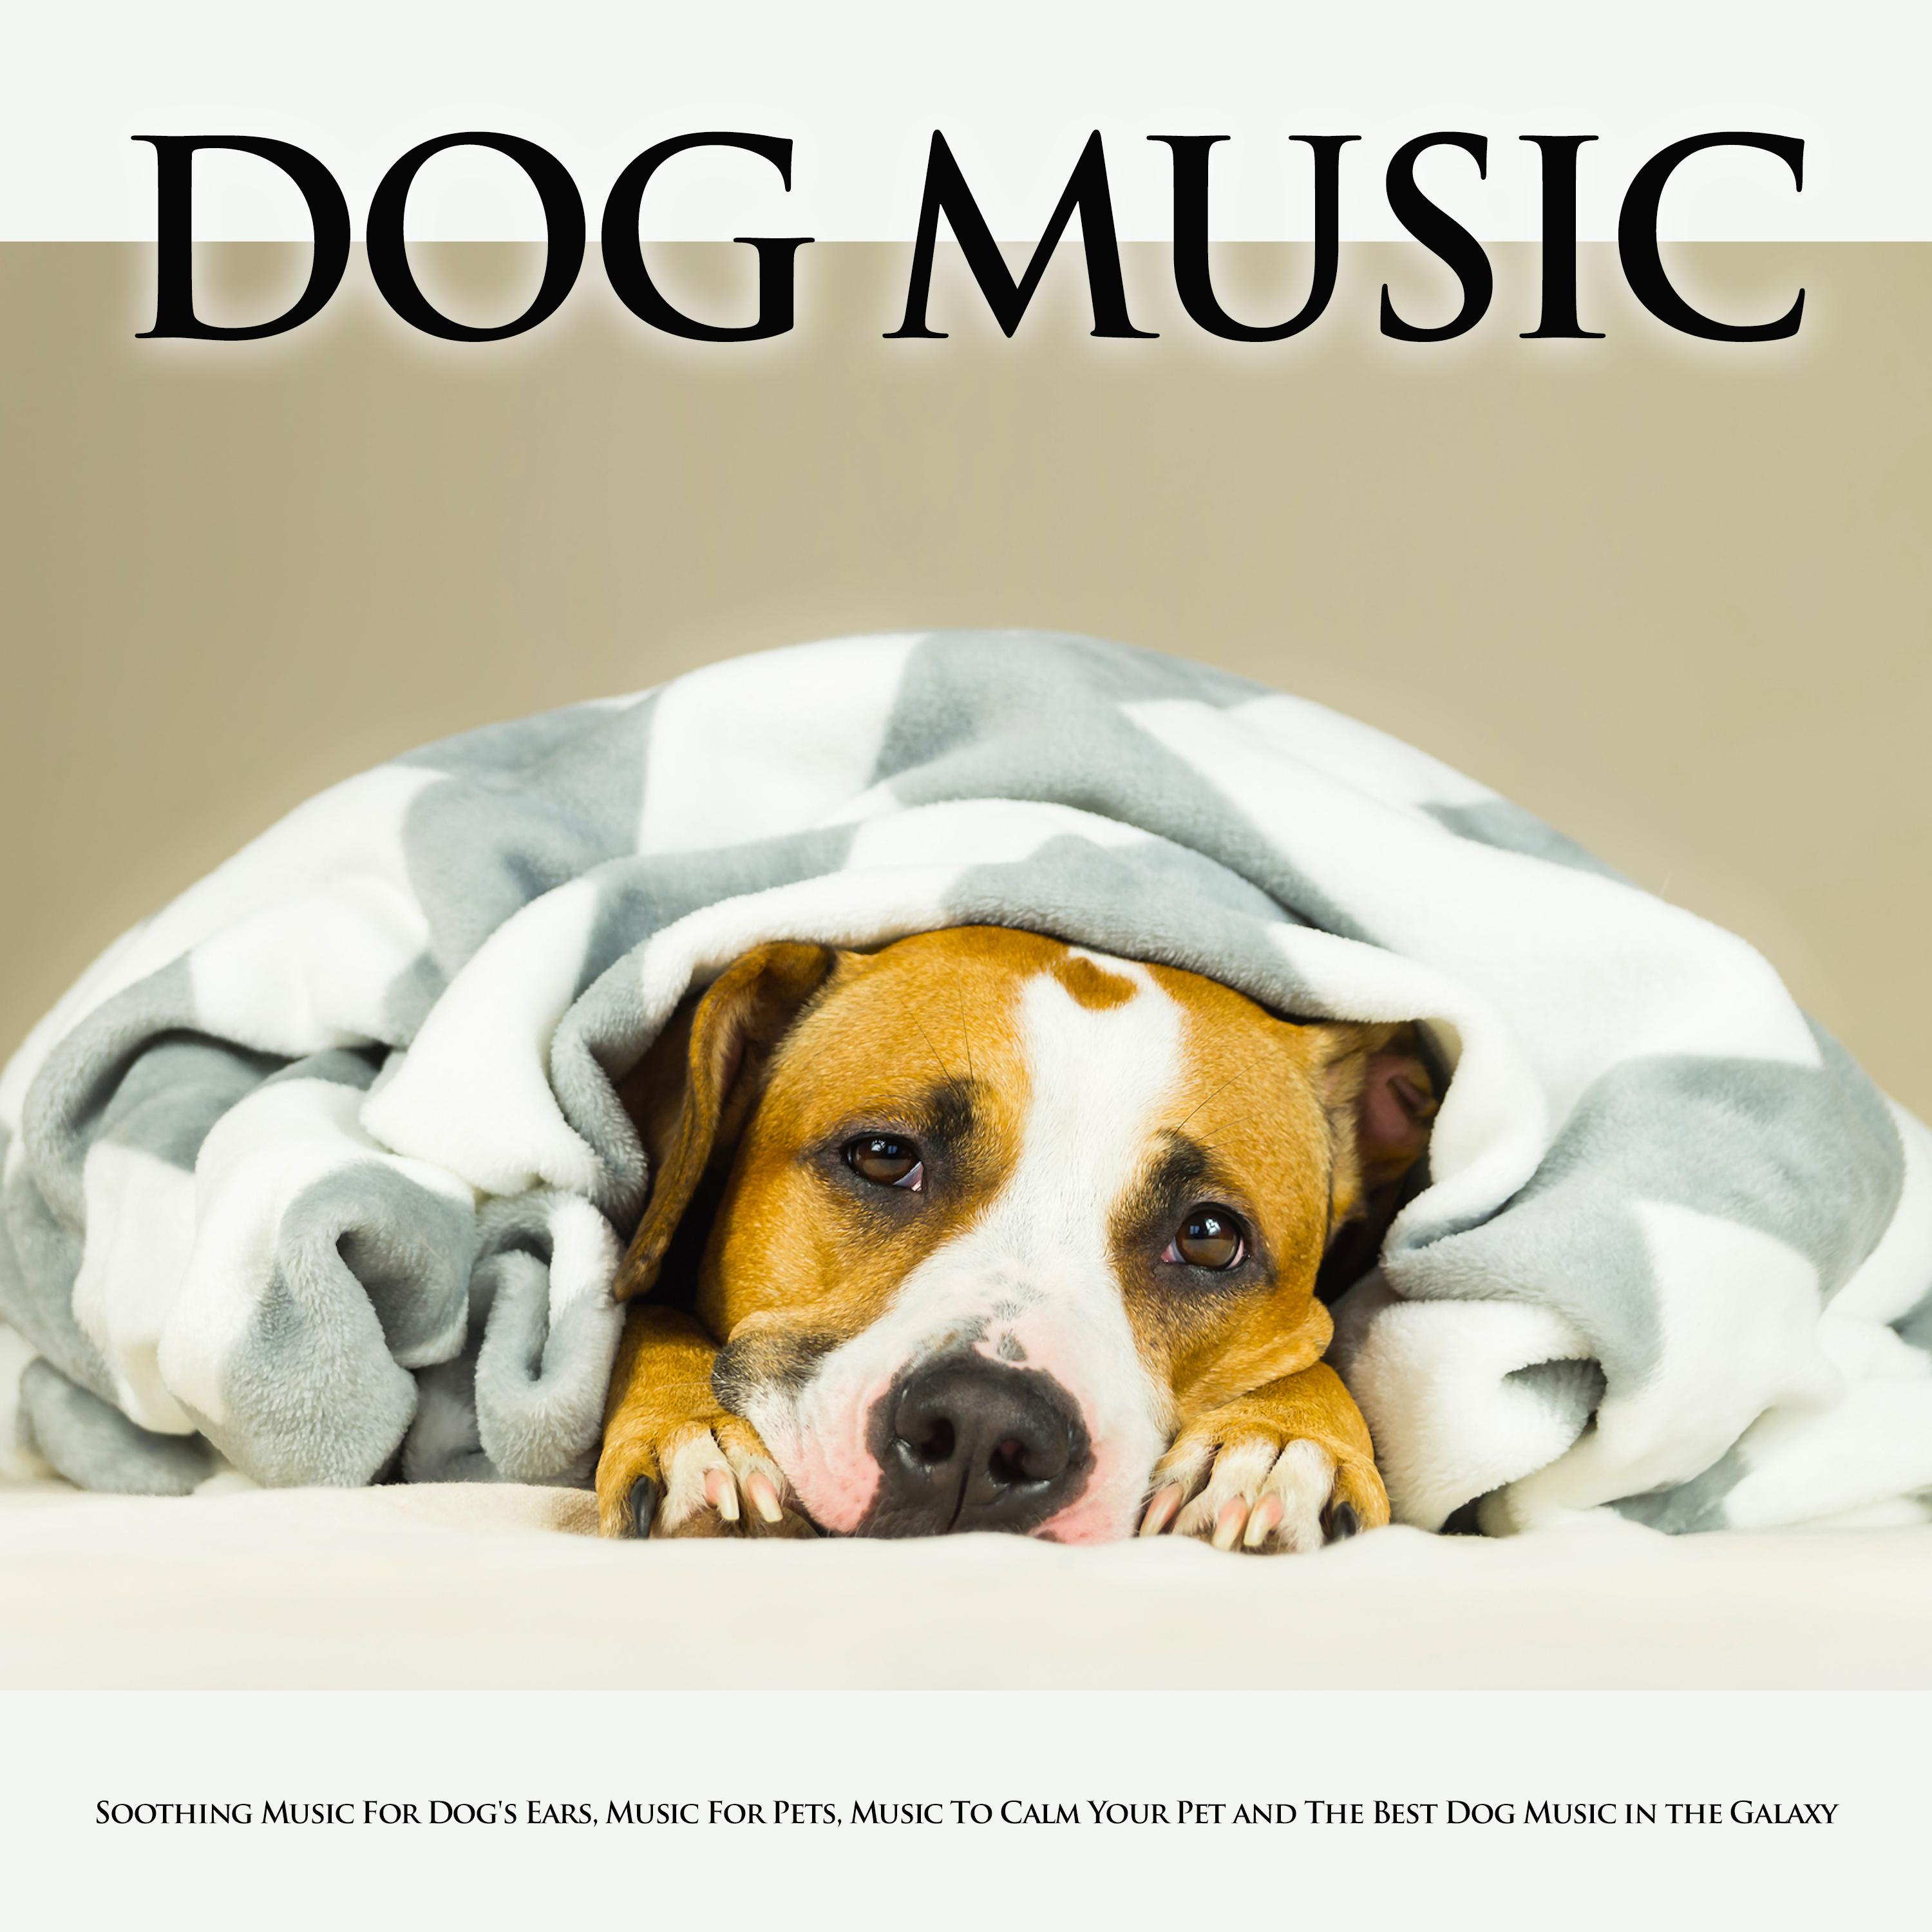 Dog Music: Soothing Music For Dog's Ears, Music For Pets, Music To Calm Your Pet and The Best Dog Music in the Galaxy